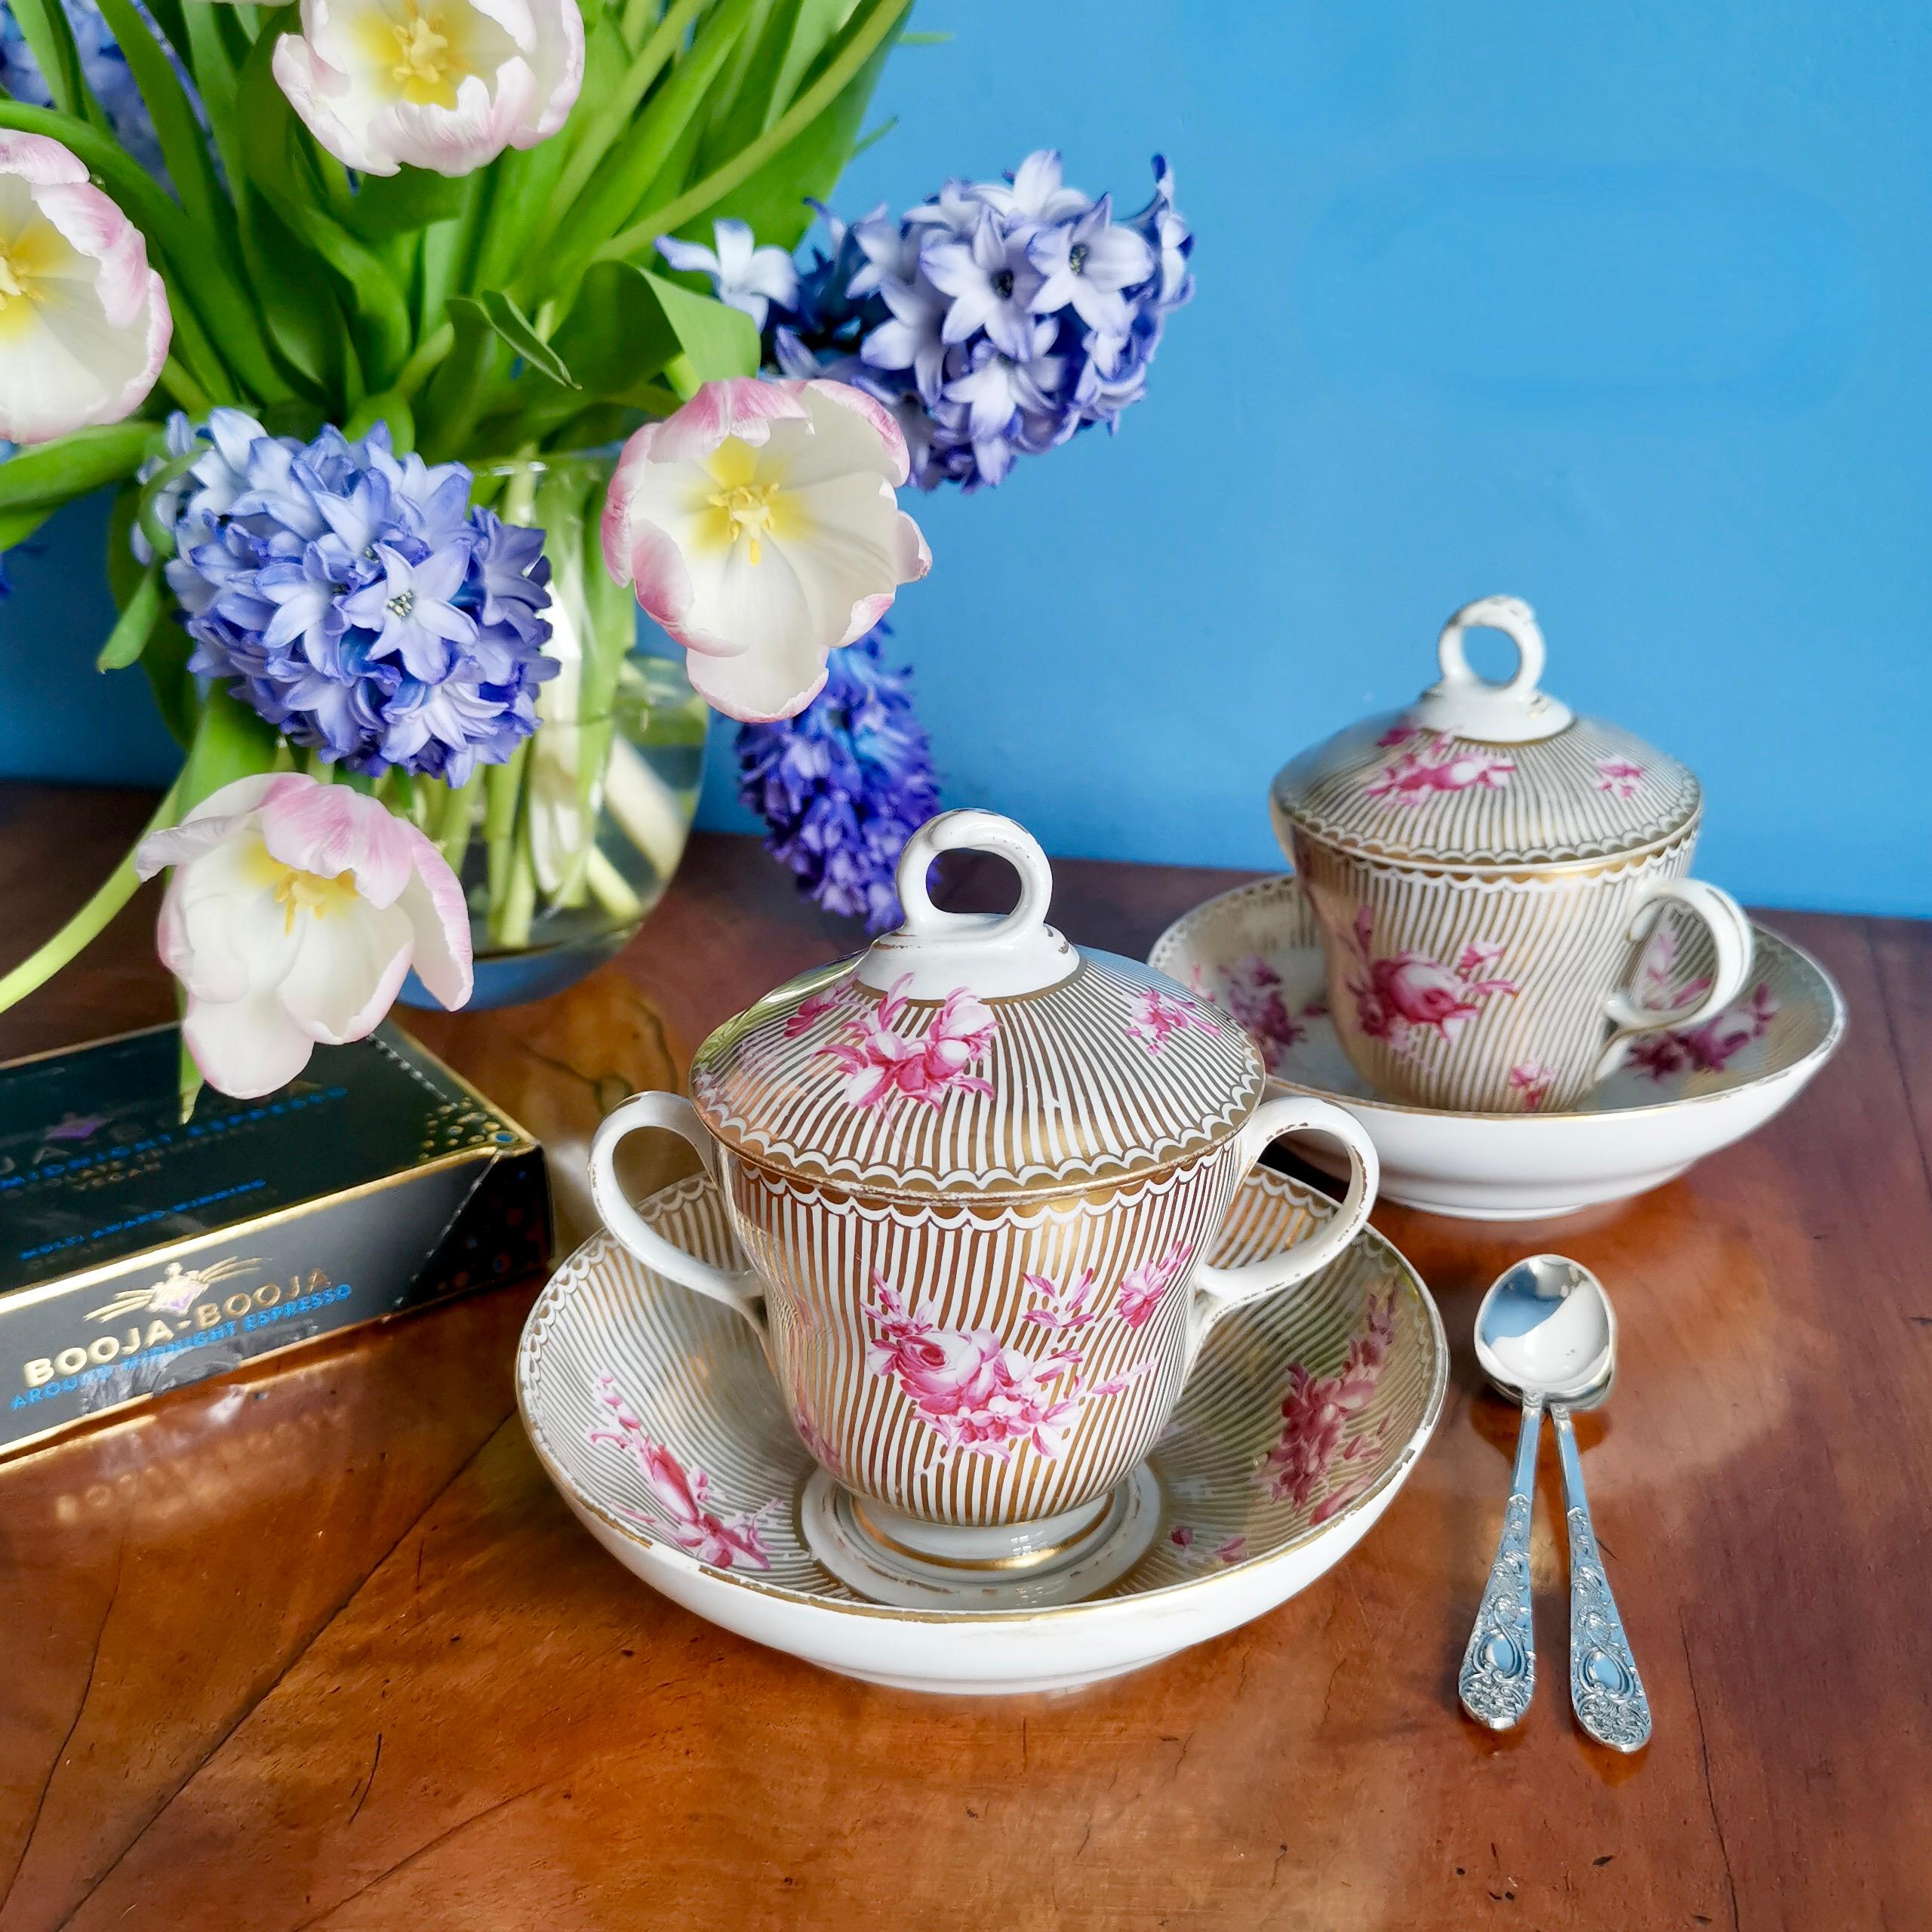 This is a beautiful chocolate cup set made by Chelsea-Derby between 1770 and 1775, which was the Rococo era. The set consists of a cup, a saucer and a cover, and is decorated in a stunning style with slightly psychedelic gilt stripes and elegant